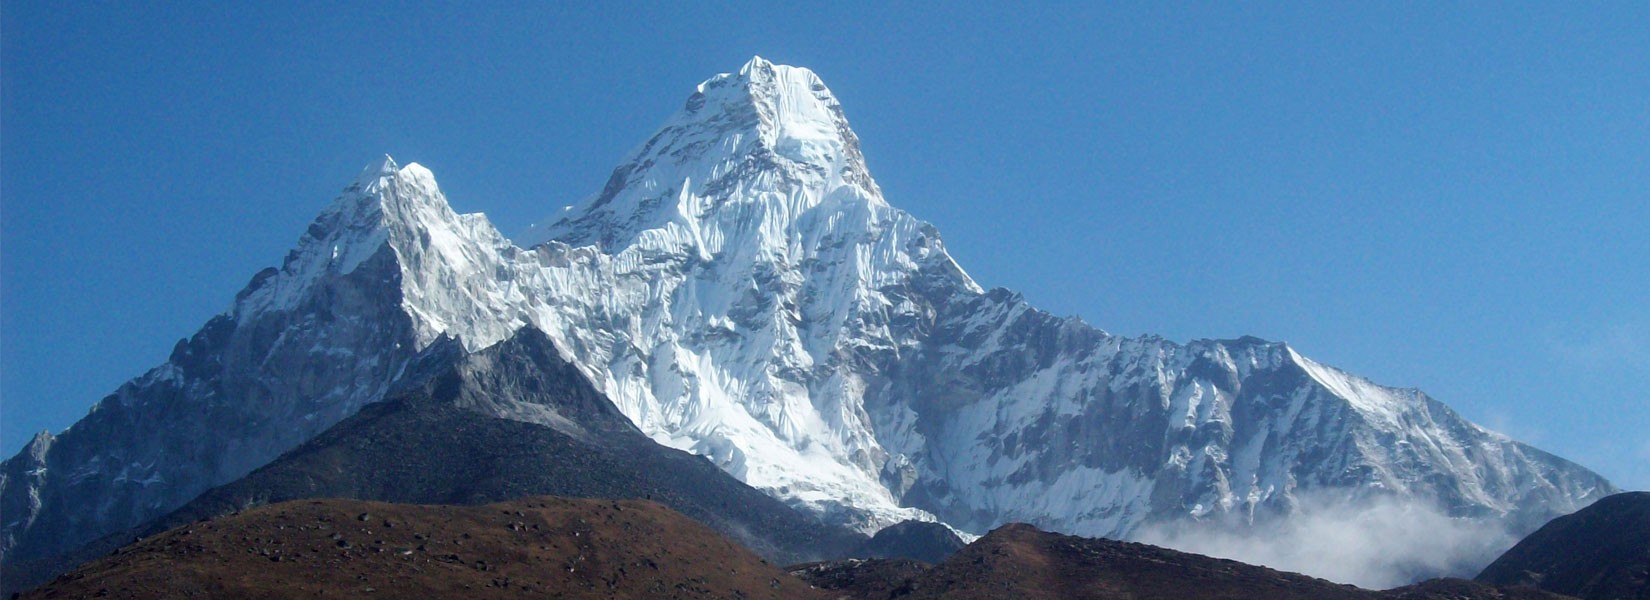 Ama Dablam Expedition Package